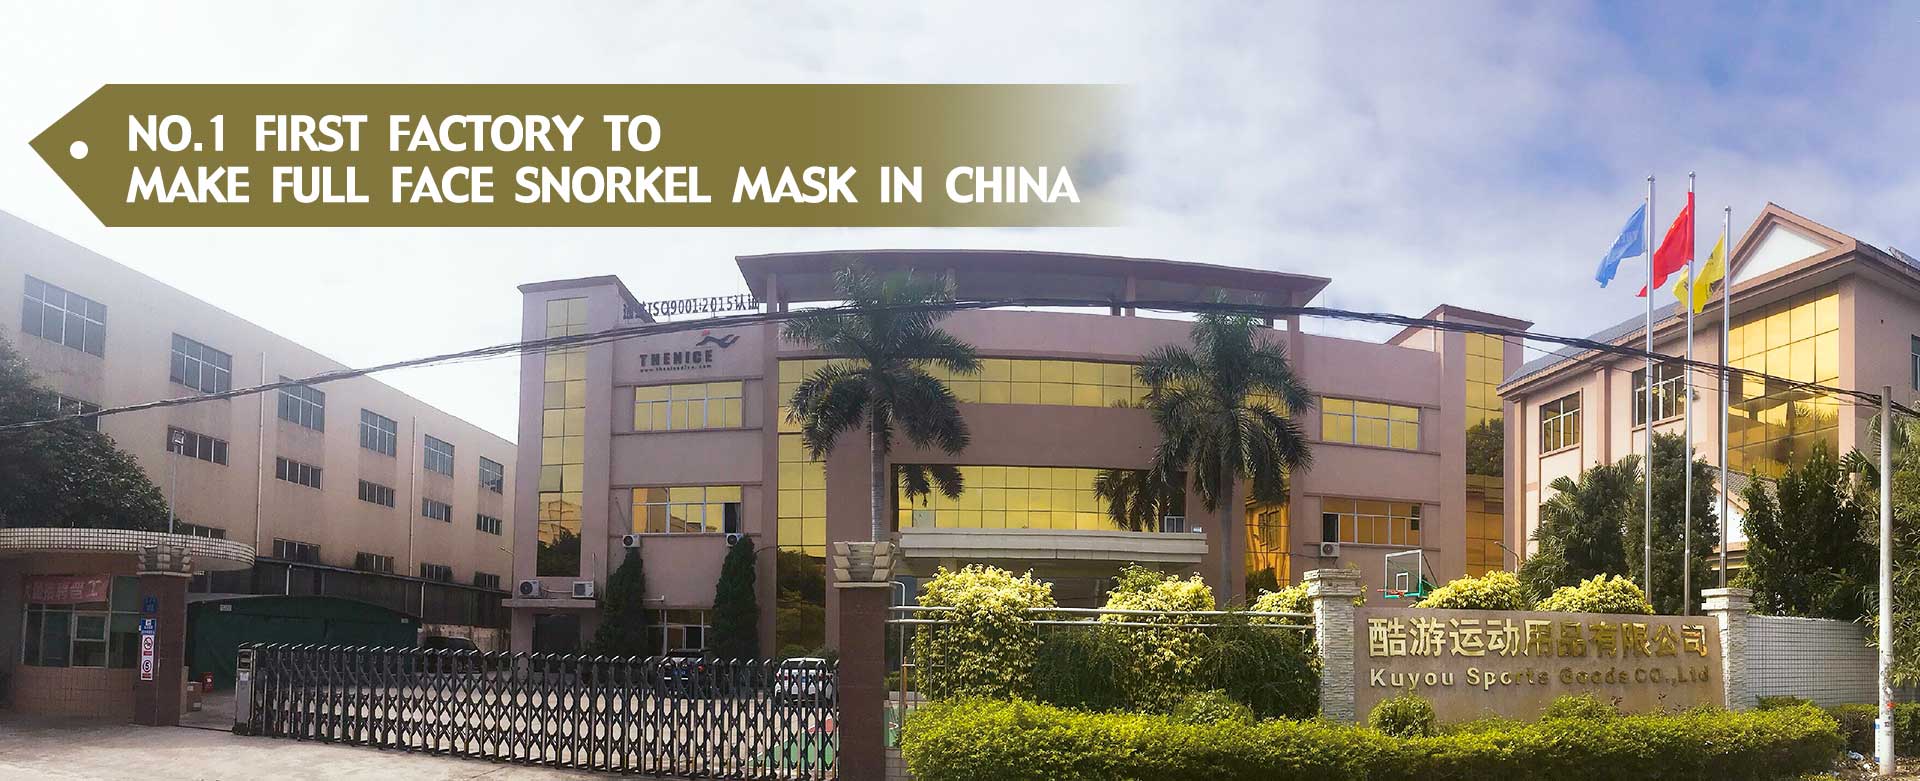 NO. 1 First Factory to make Full Face Snorkel Mask in China